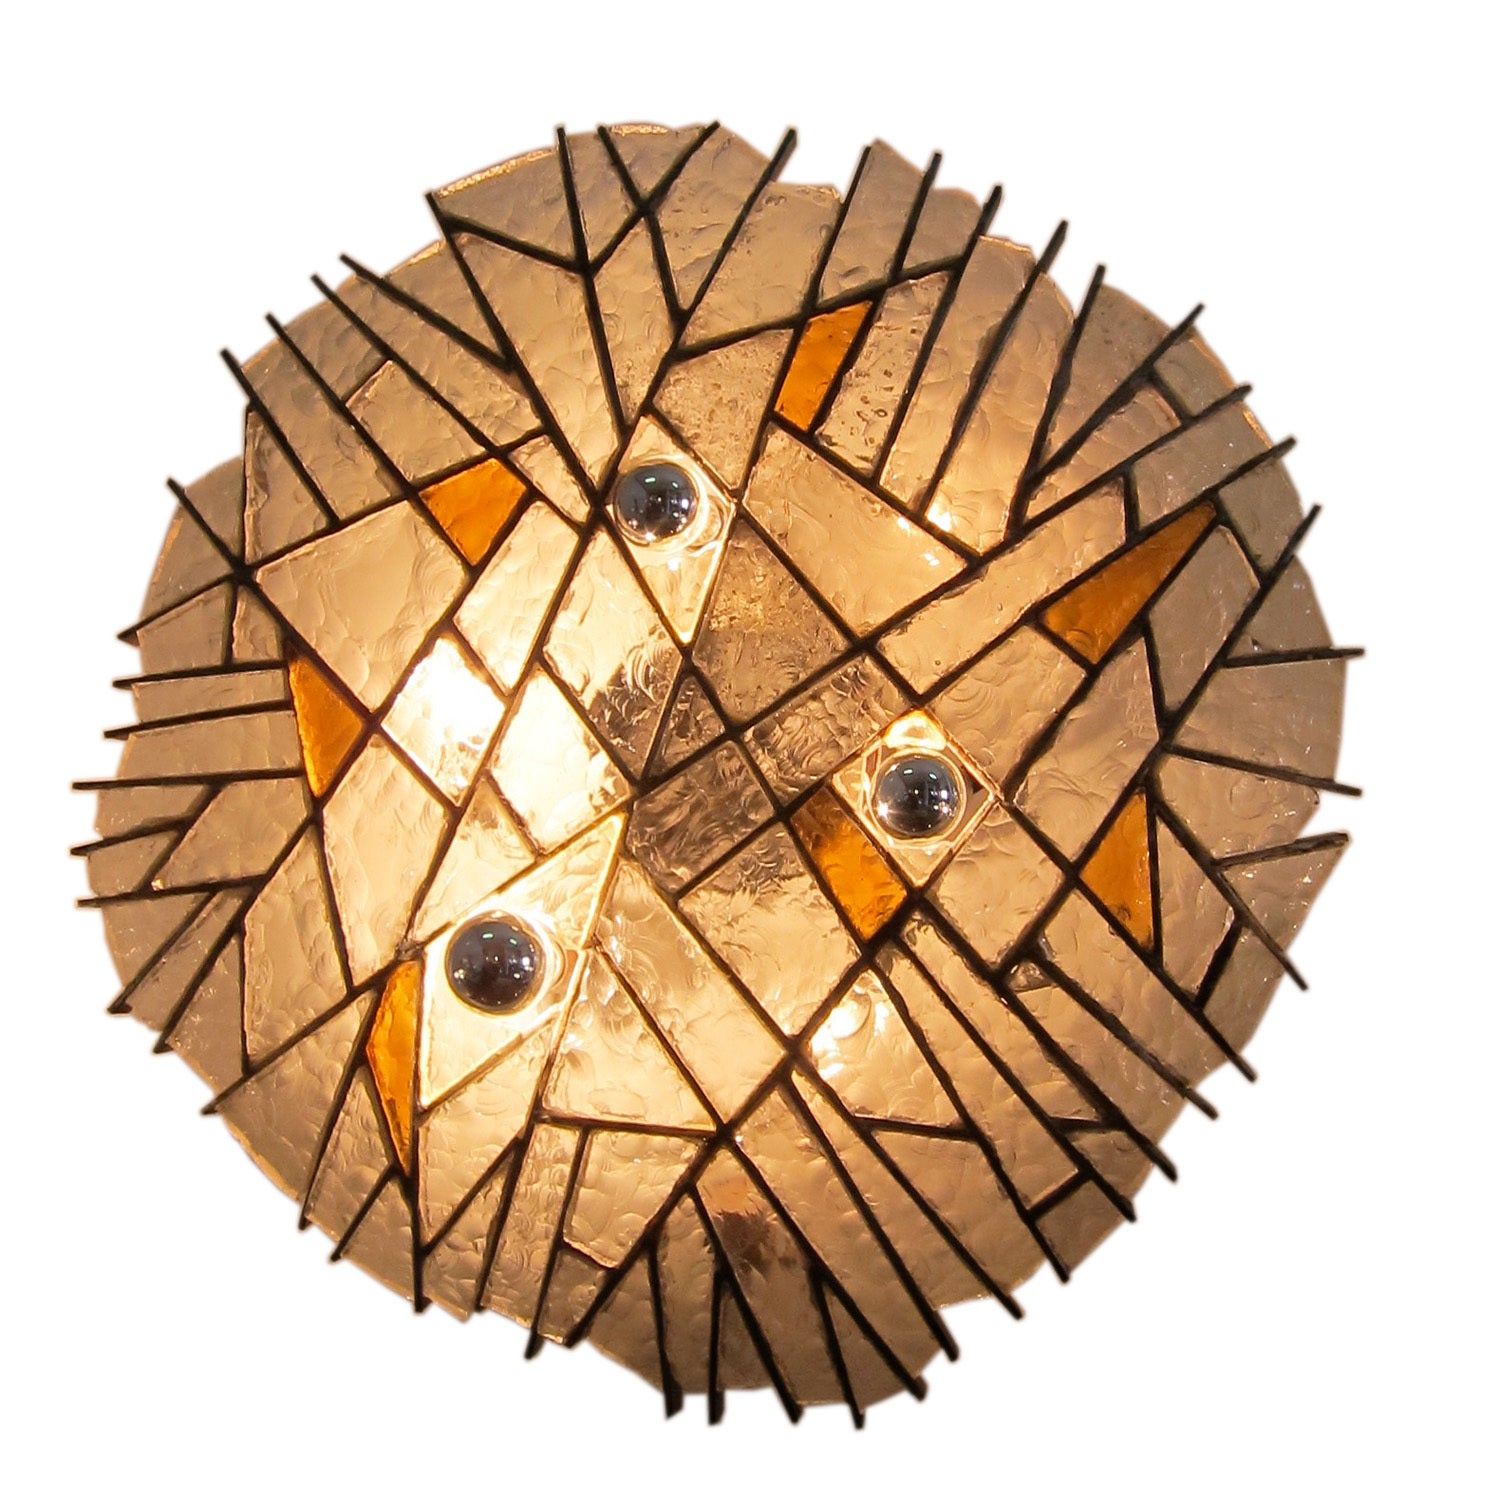 Poliarte Wall/ Ceiling Sculptural Light